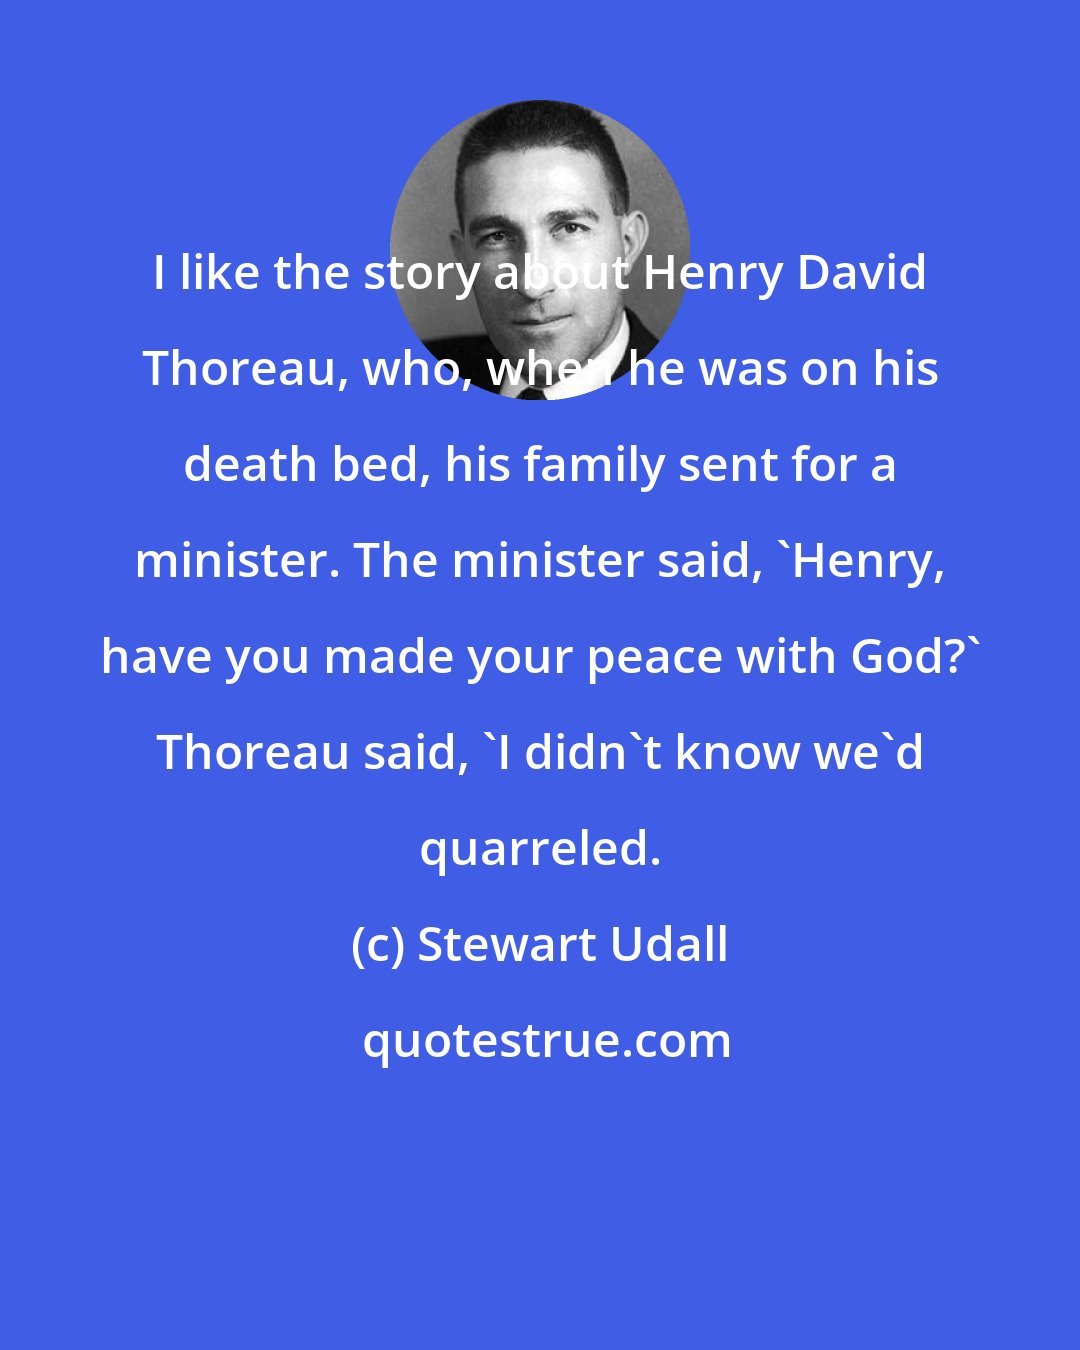 Stewart Udall: I like the story about Henry David Thoreau, who, when he was on his death bed, his family sent for a minister. The minister said, 'Henry, have you made your peace with God?' Thoreau said, 'I didn't know we'd quarreled.